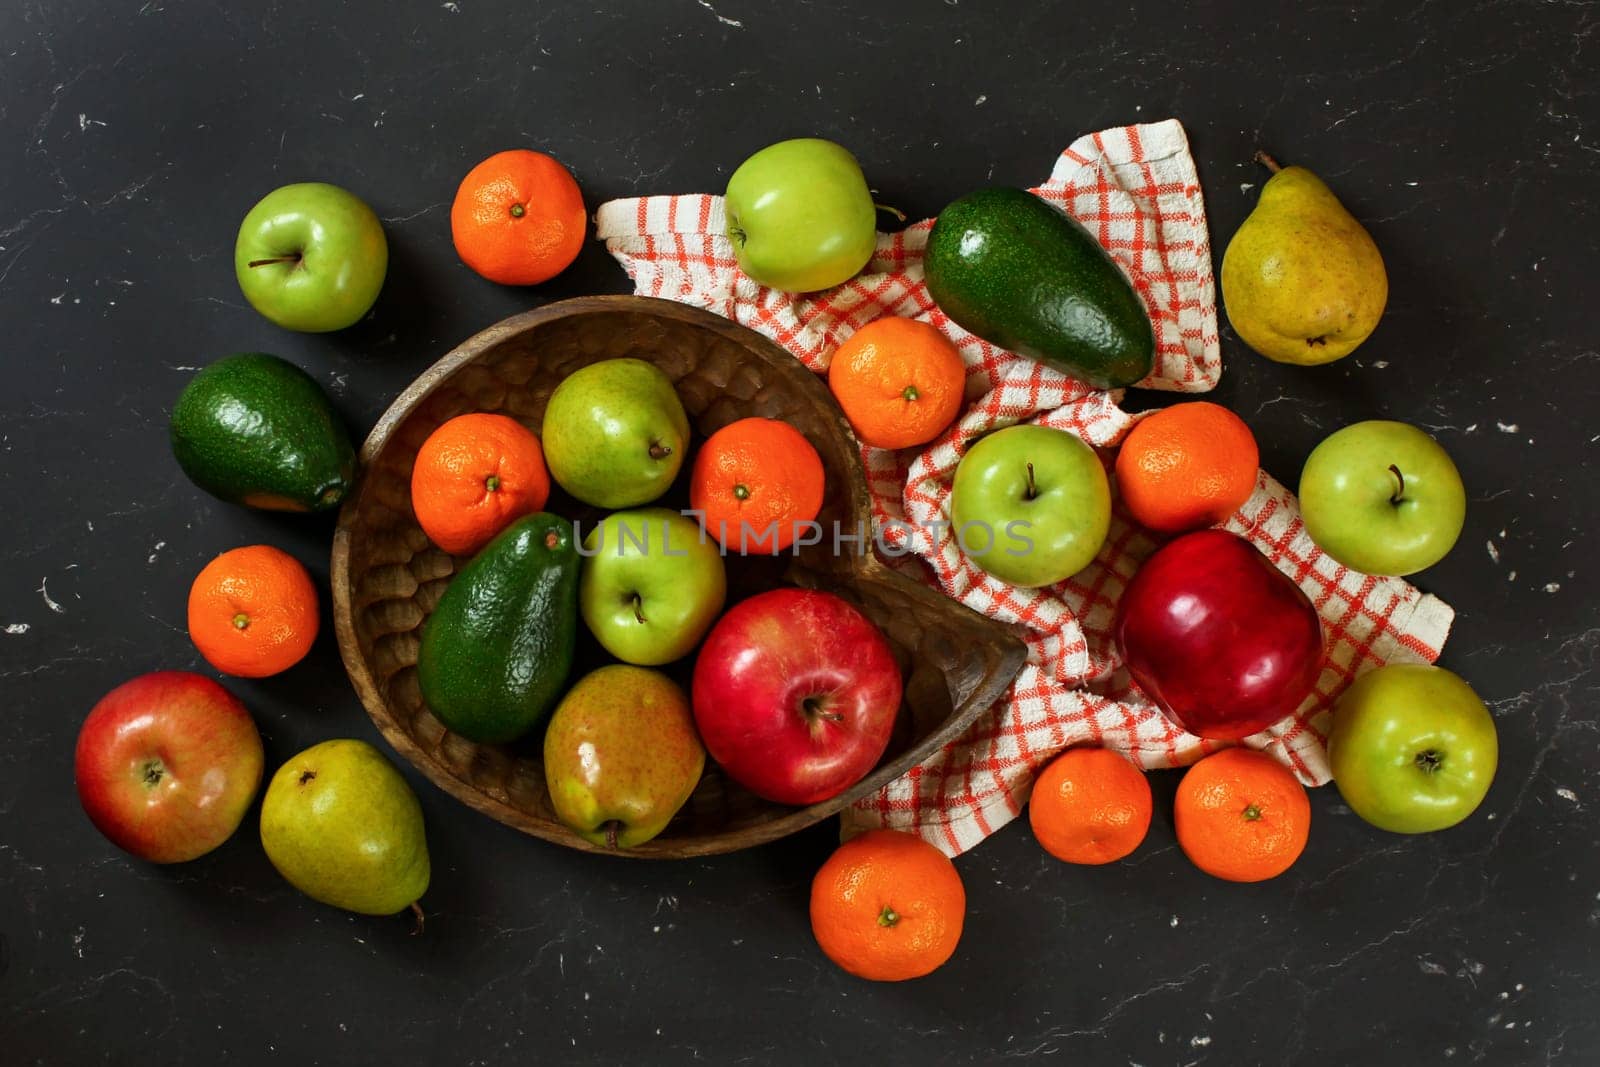 Apples, pears, oranges and avocado in wooden carved bowl on black marble like board, view from above by Ivanko